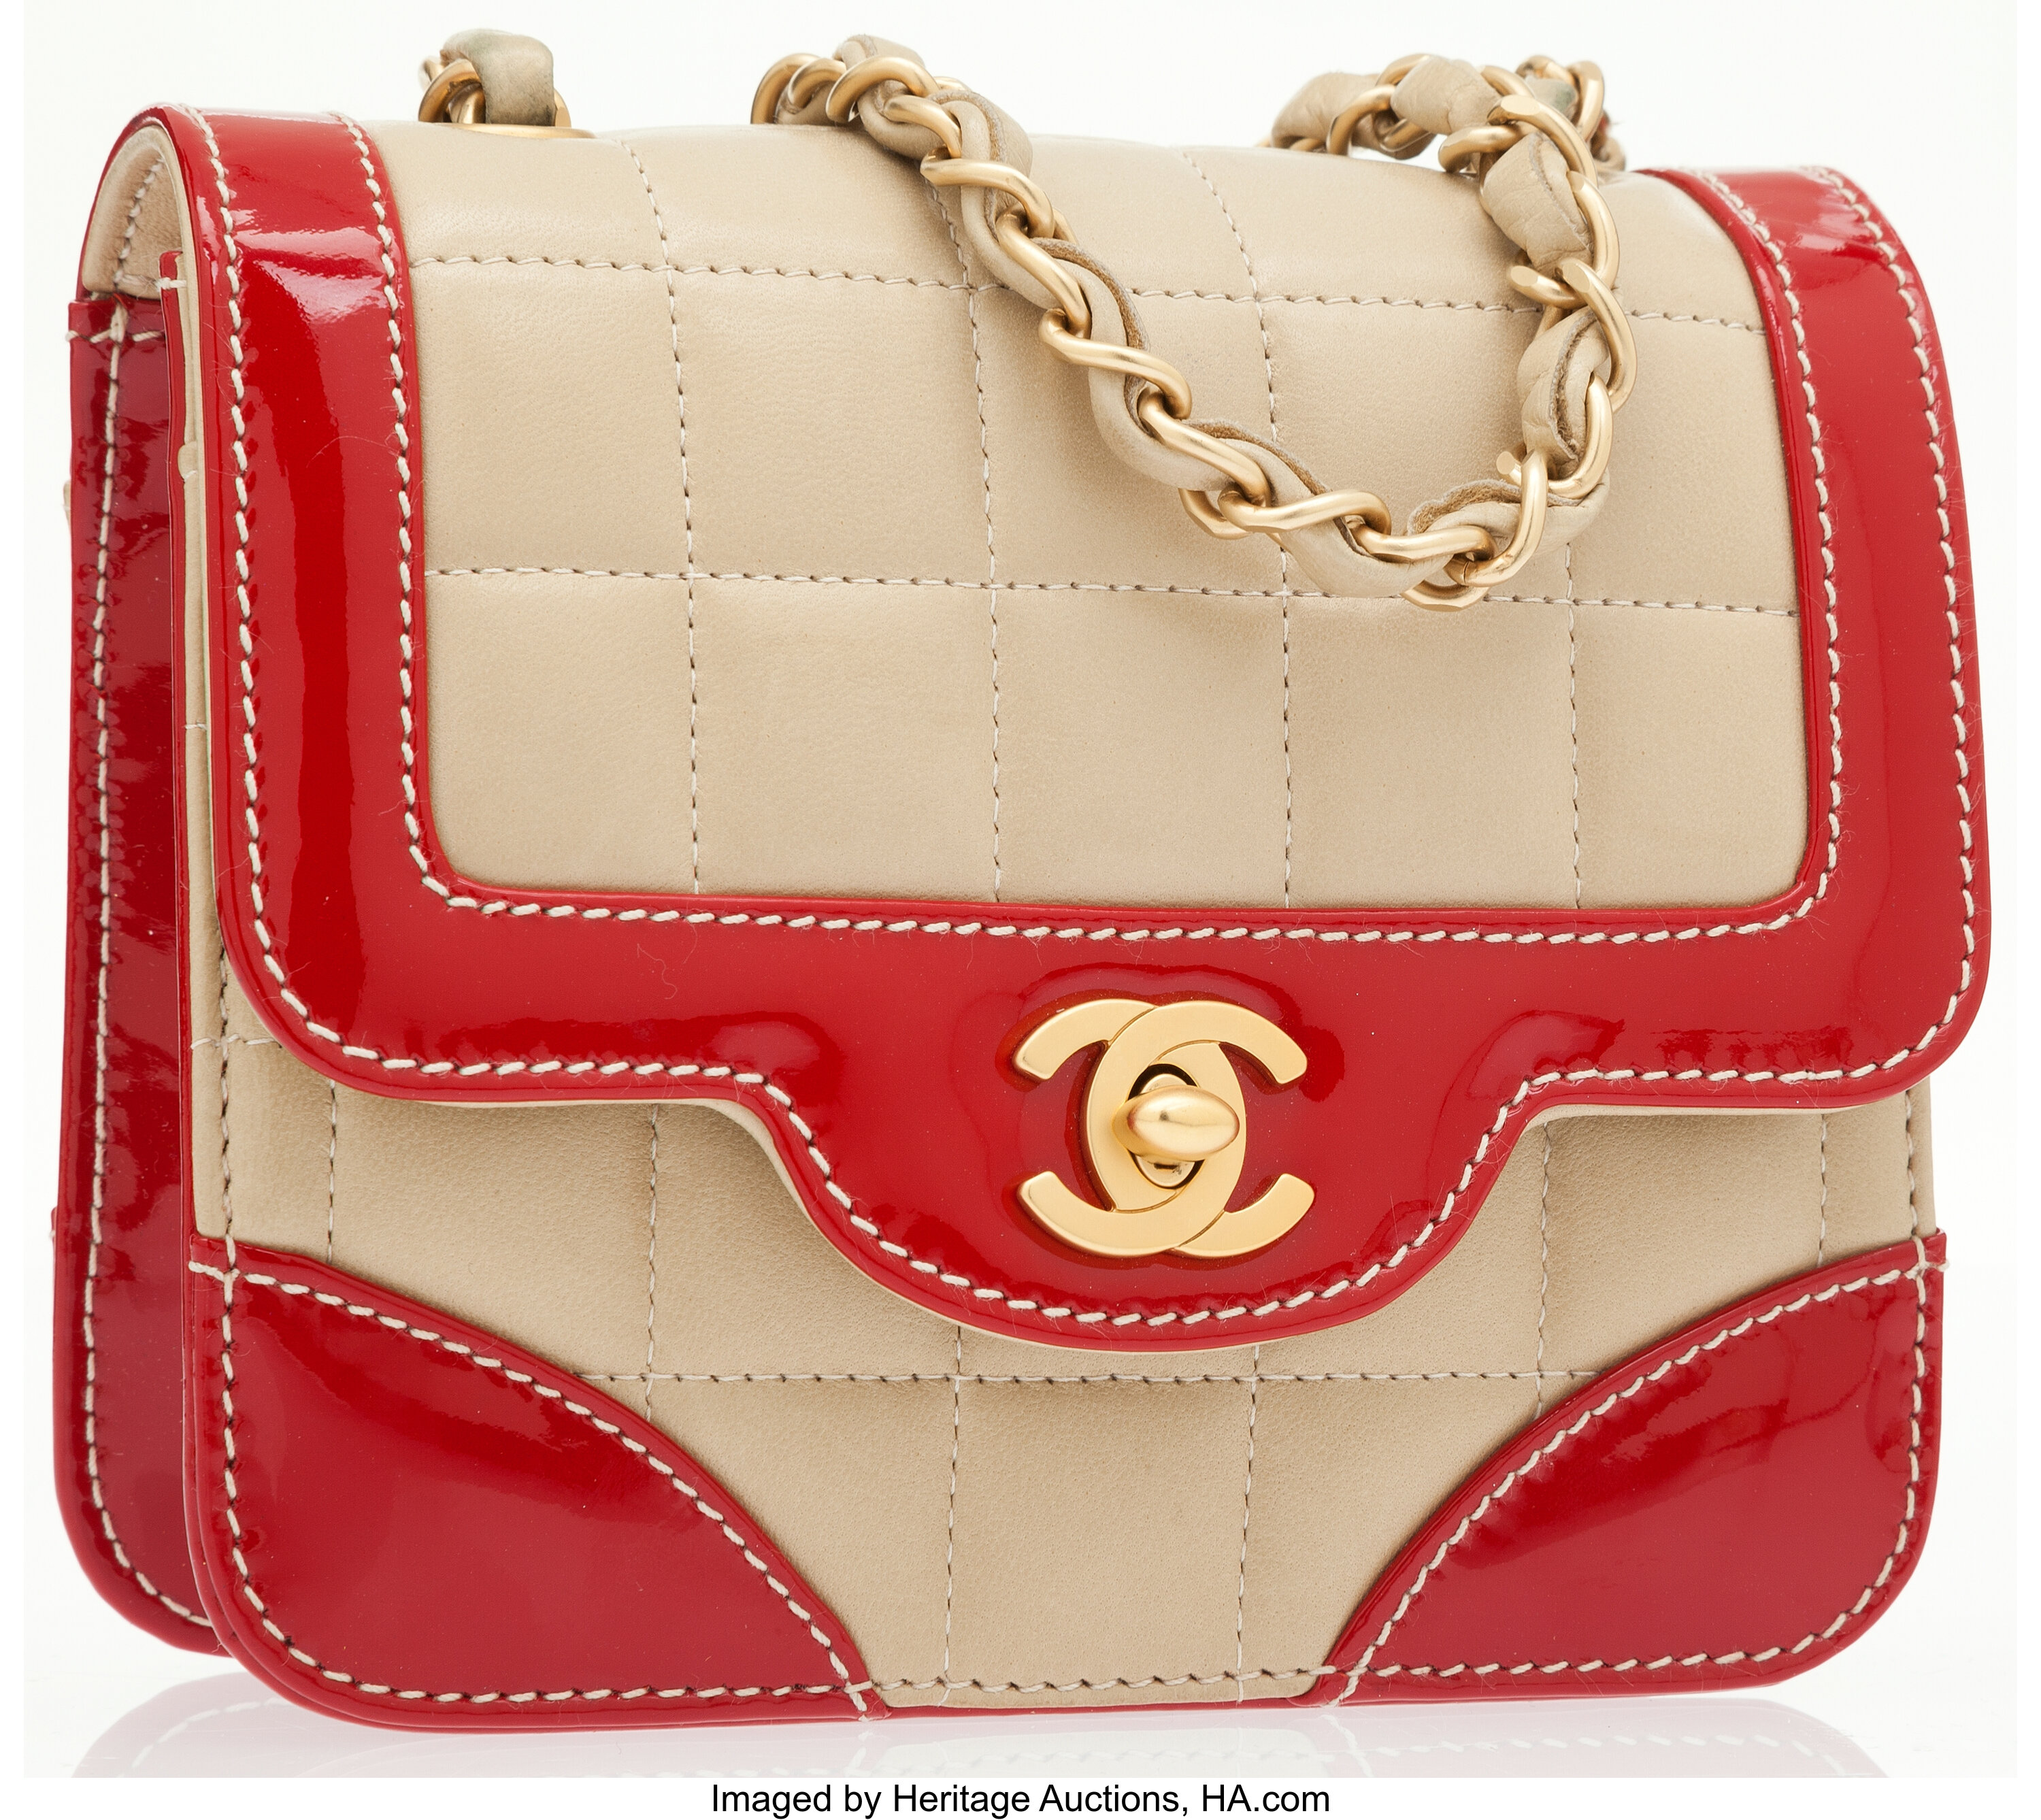 chanel bags authentic